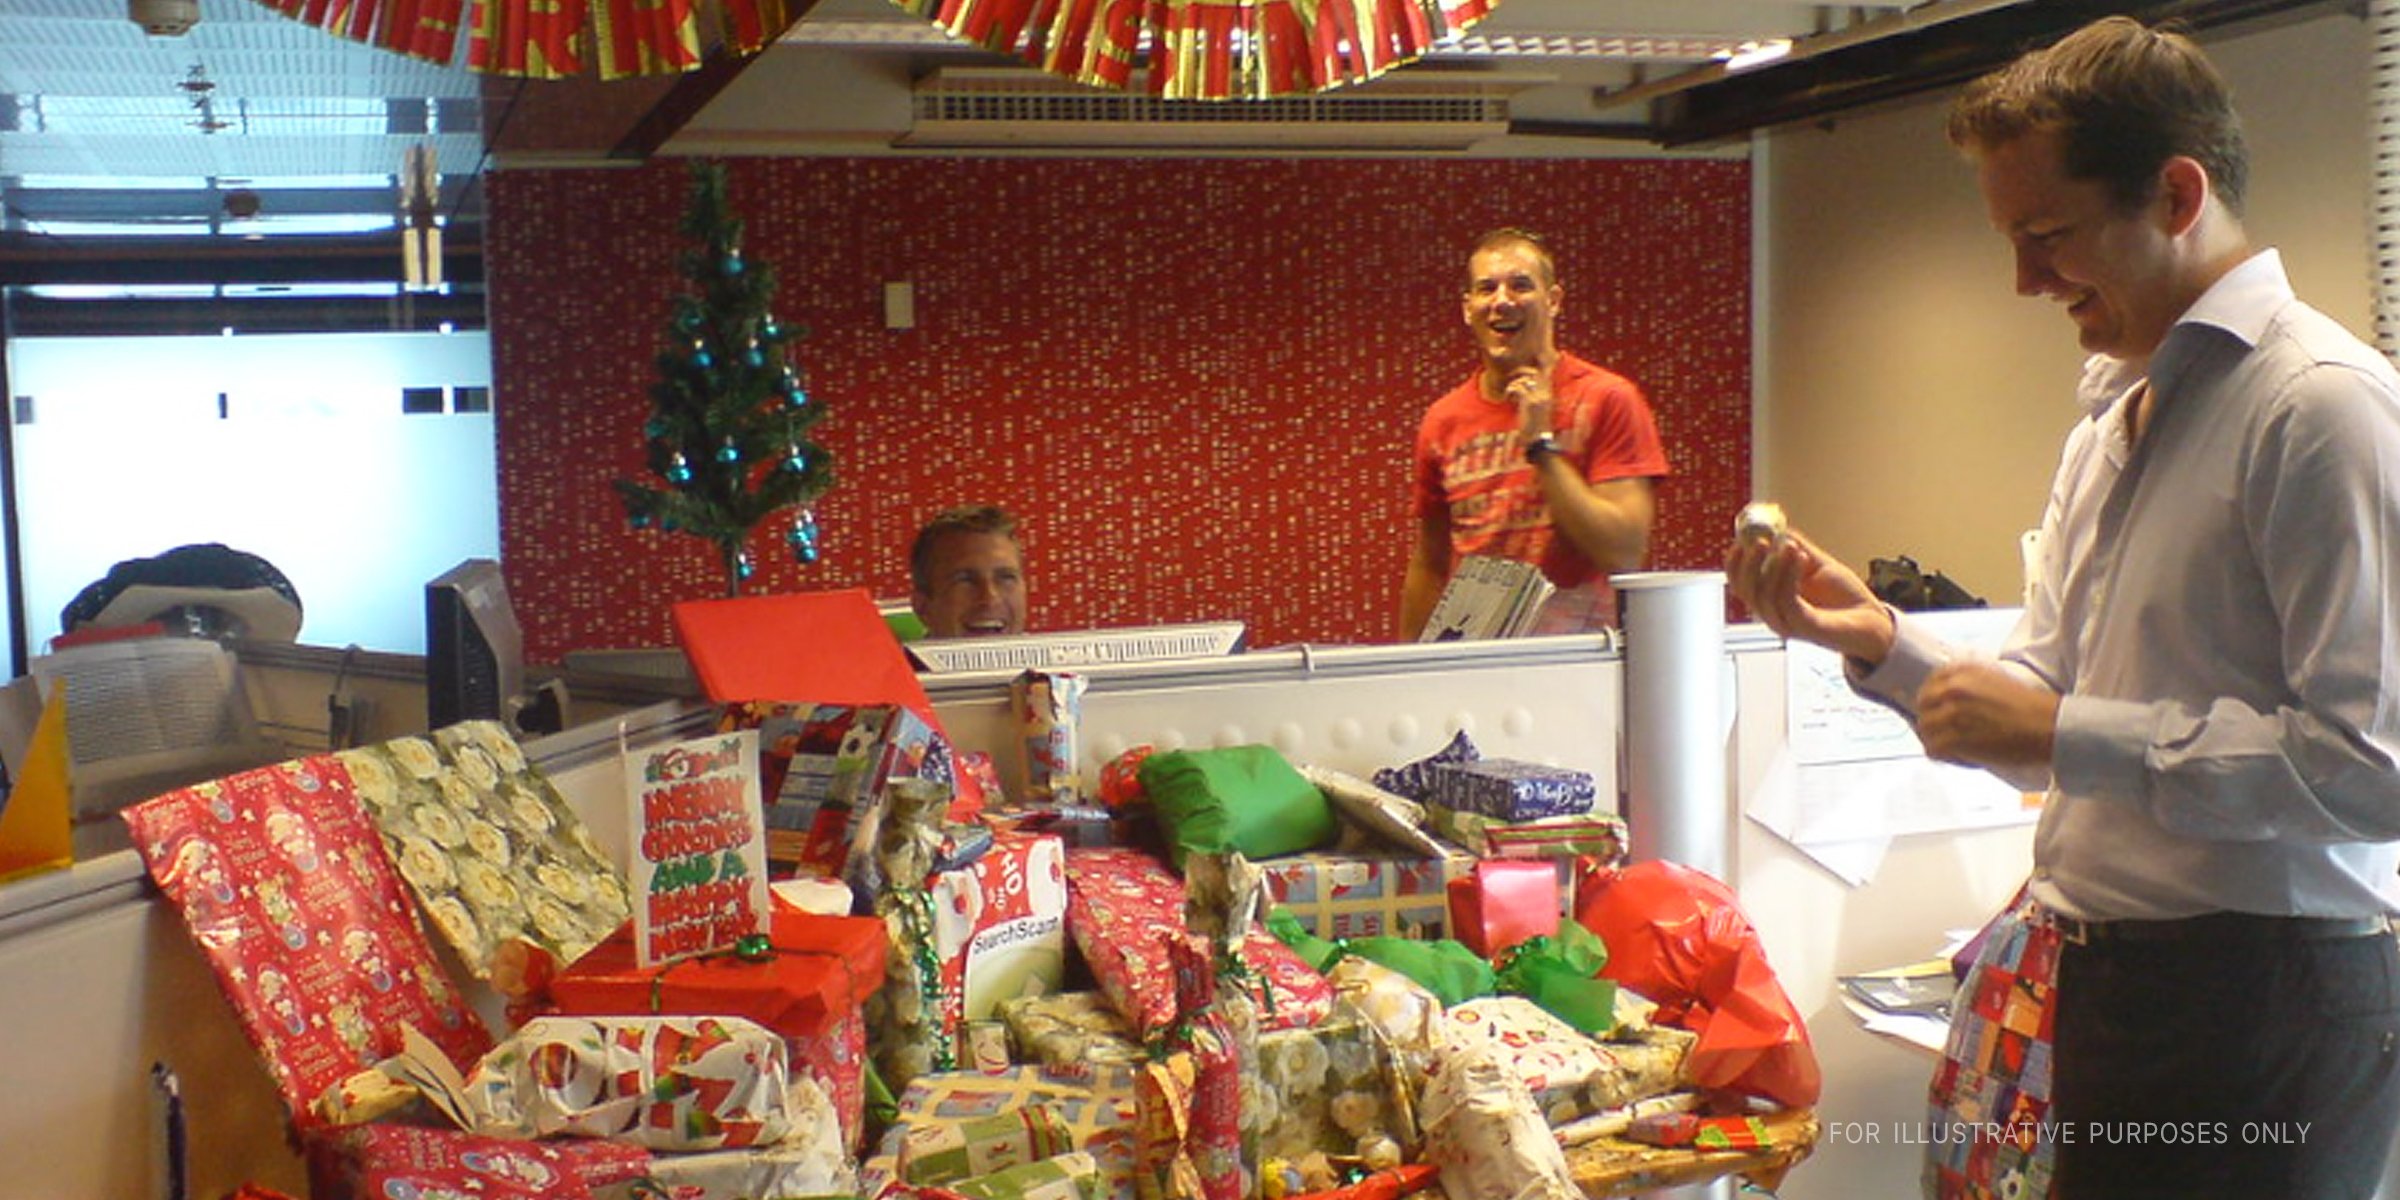 Man contemplating many christmas presents on a desk | Source: Flickr/AussieGold (CC BY 2.0)